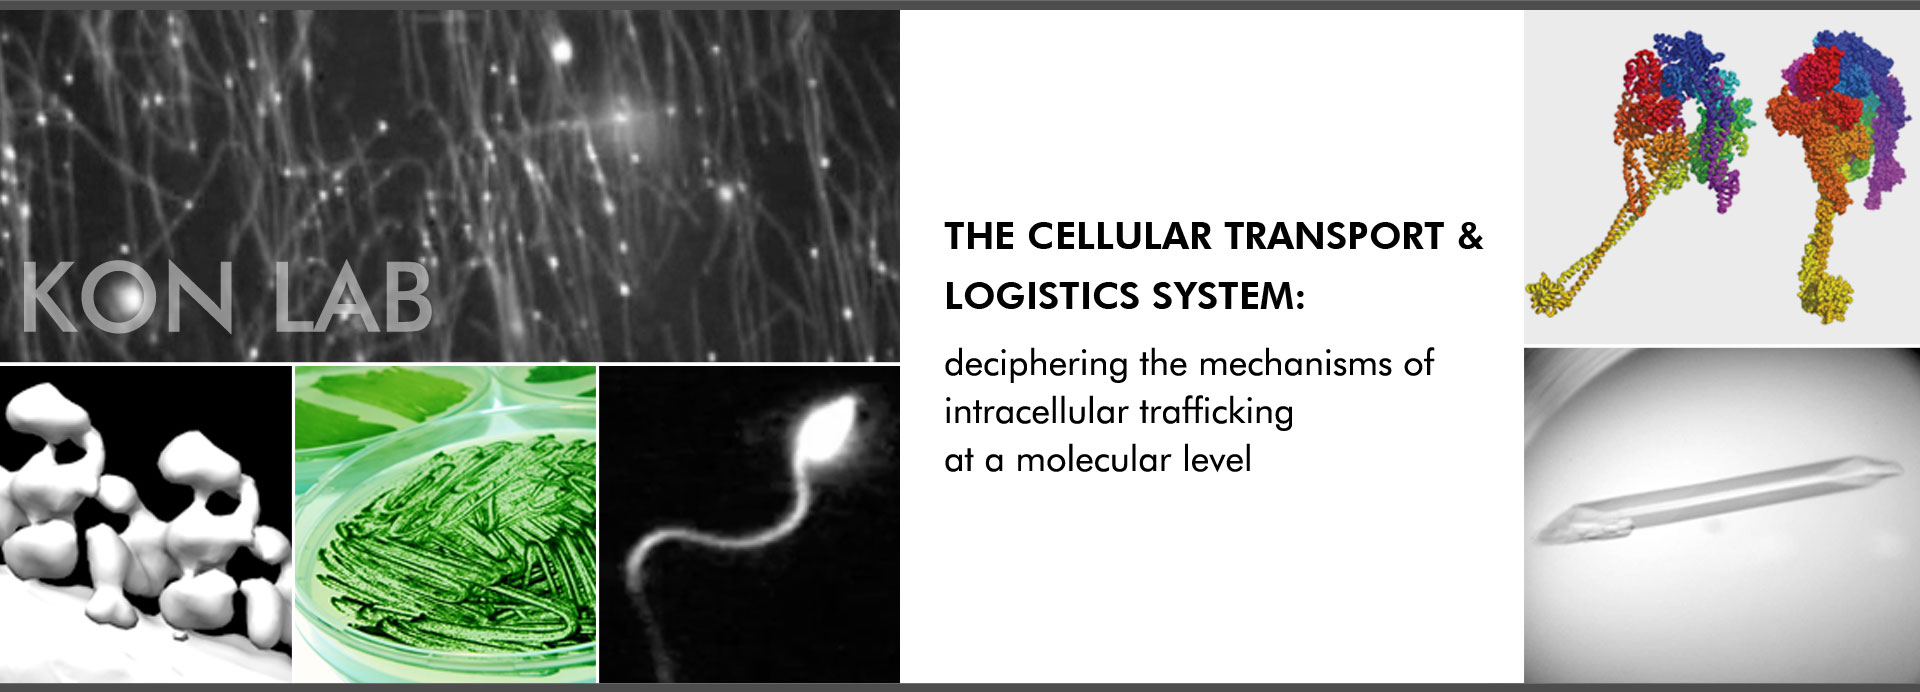 The cellular transport & logistics system: deciphering the mechanisms of intracellular trafficking at a molecular level